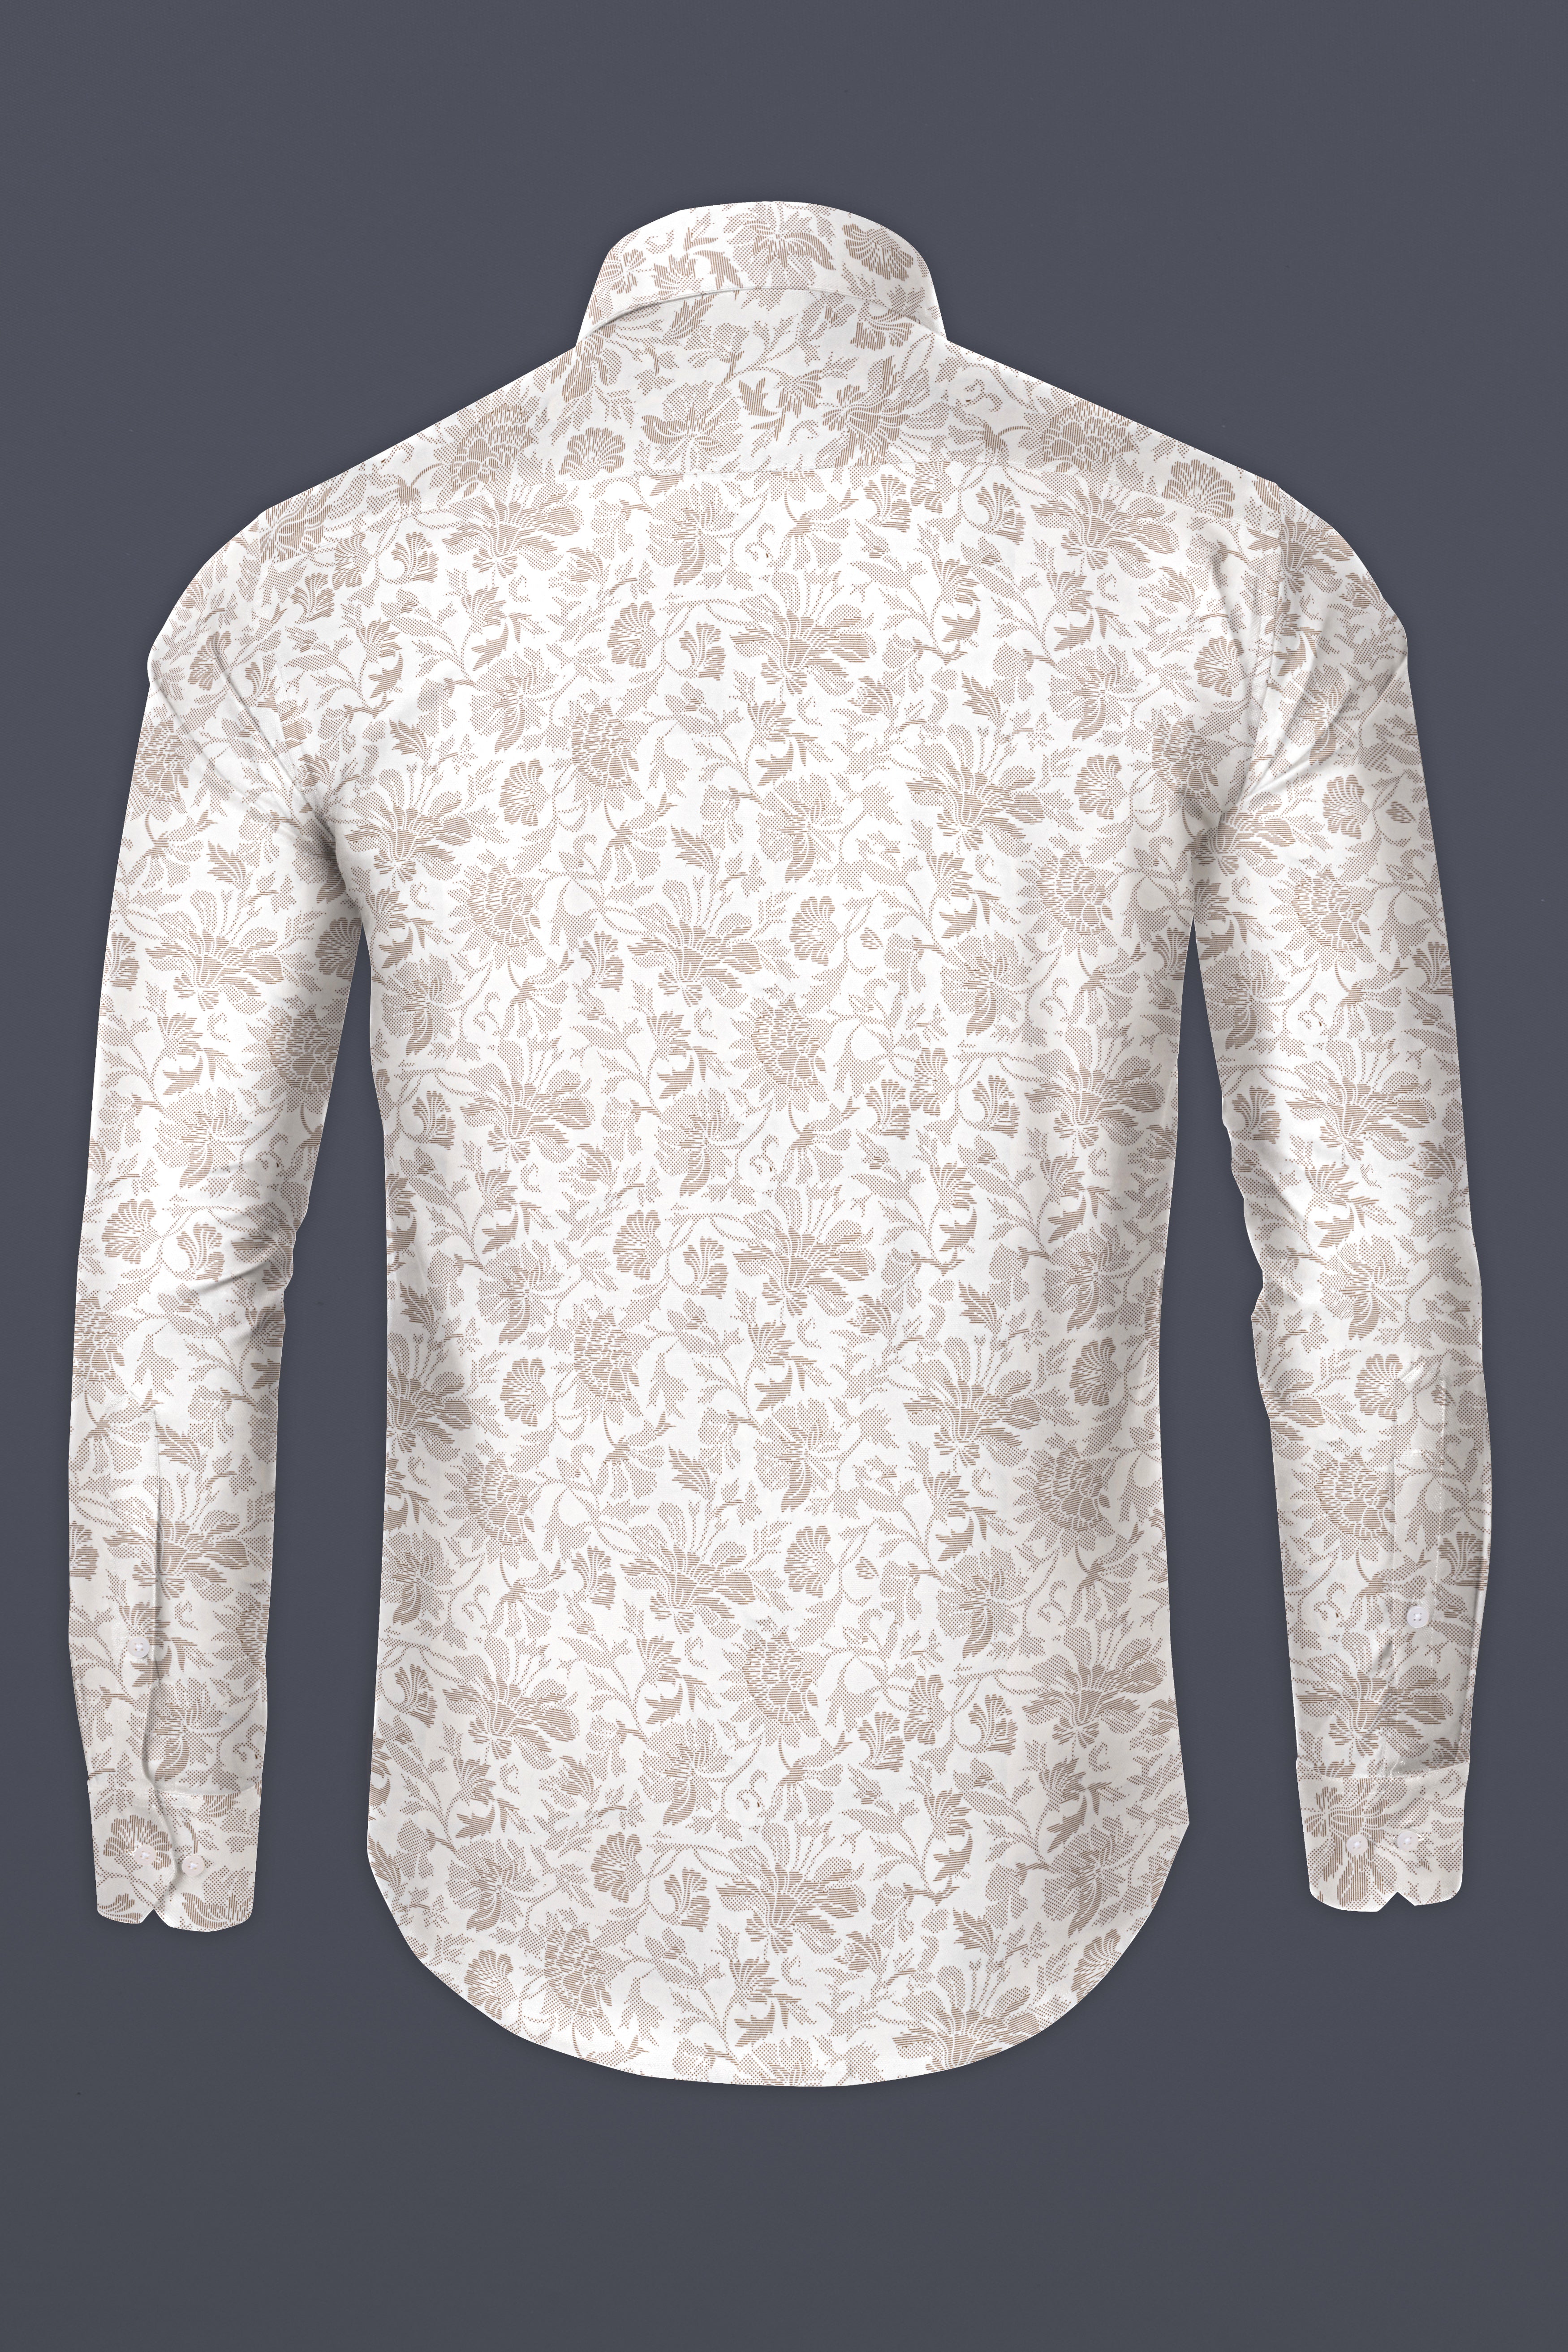 Bright White with Cinereous Brown Flower Printed Super Soft Premium Cotton Shirt